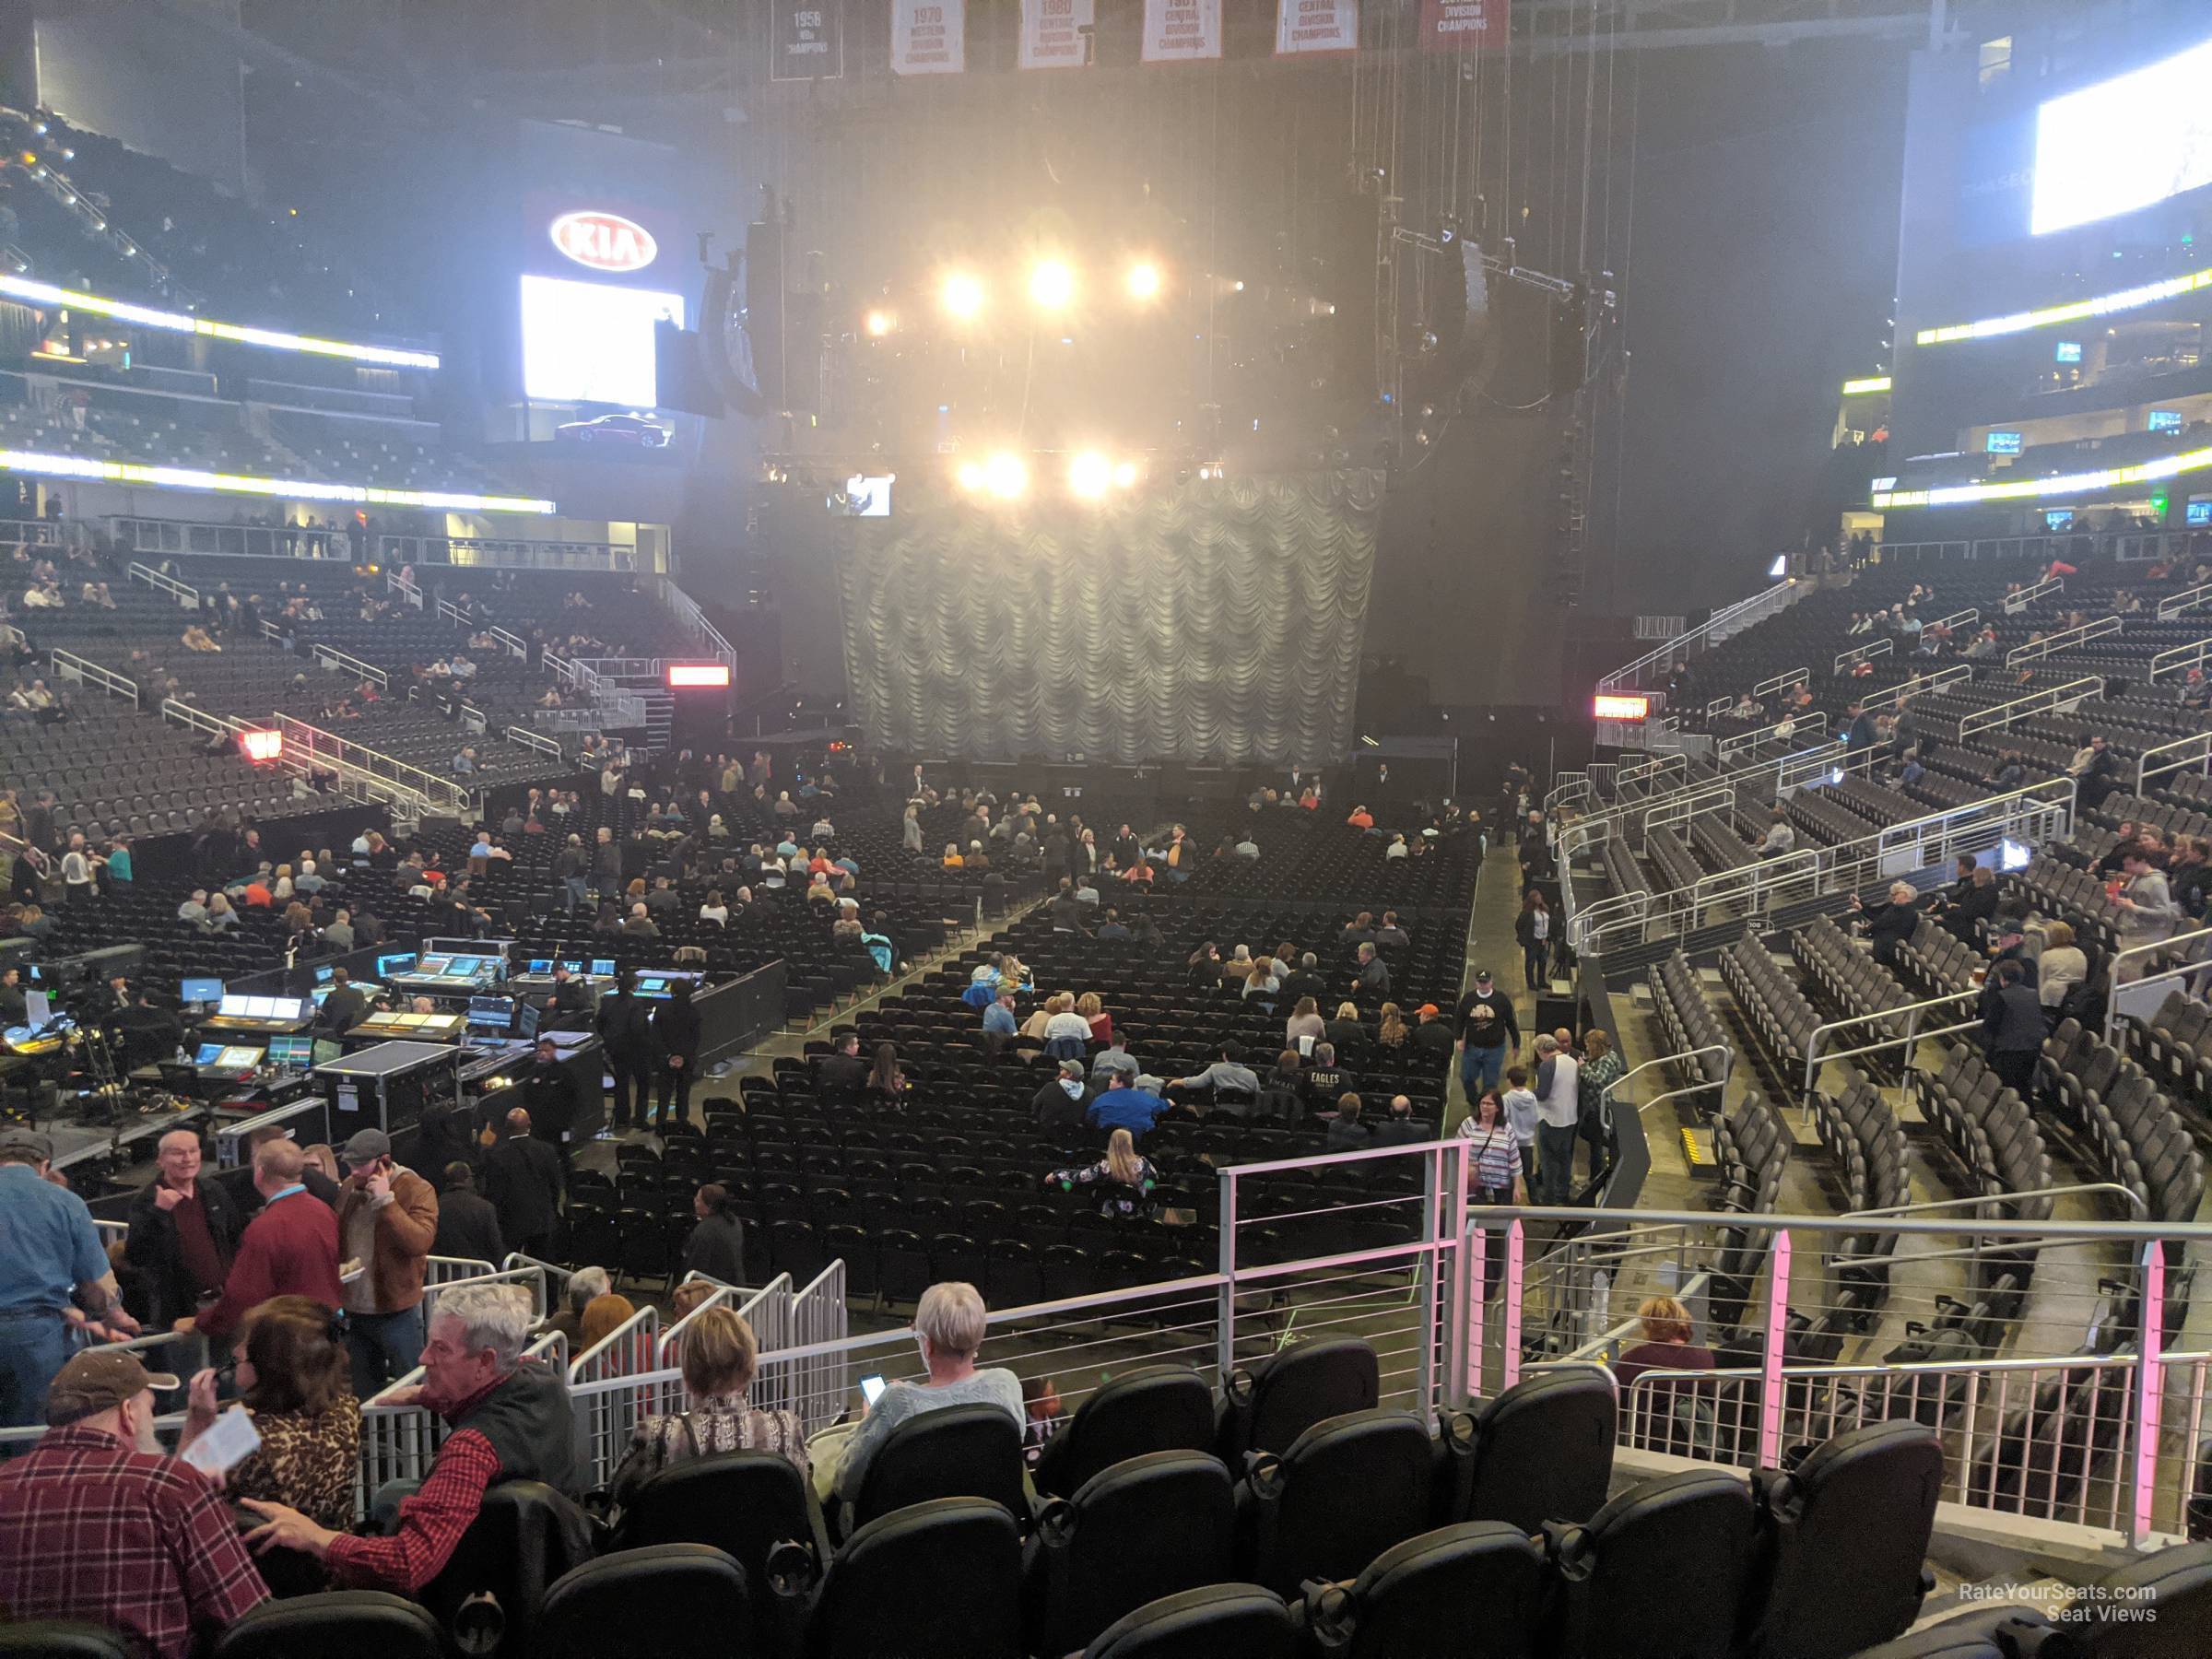 Section 112 at State Farm Arena for Concerts